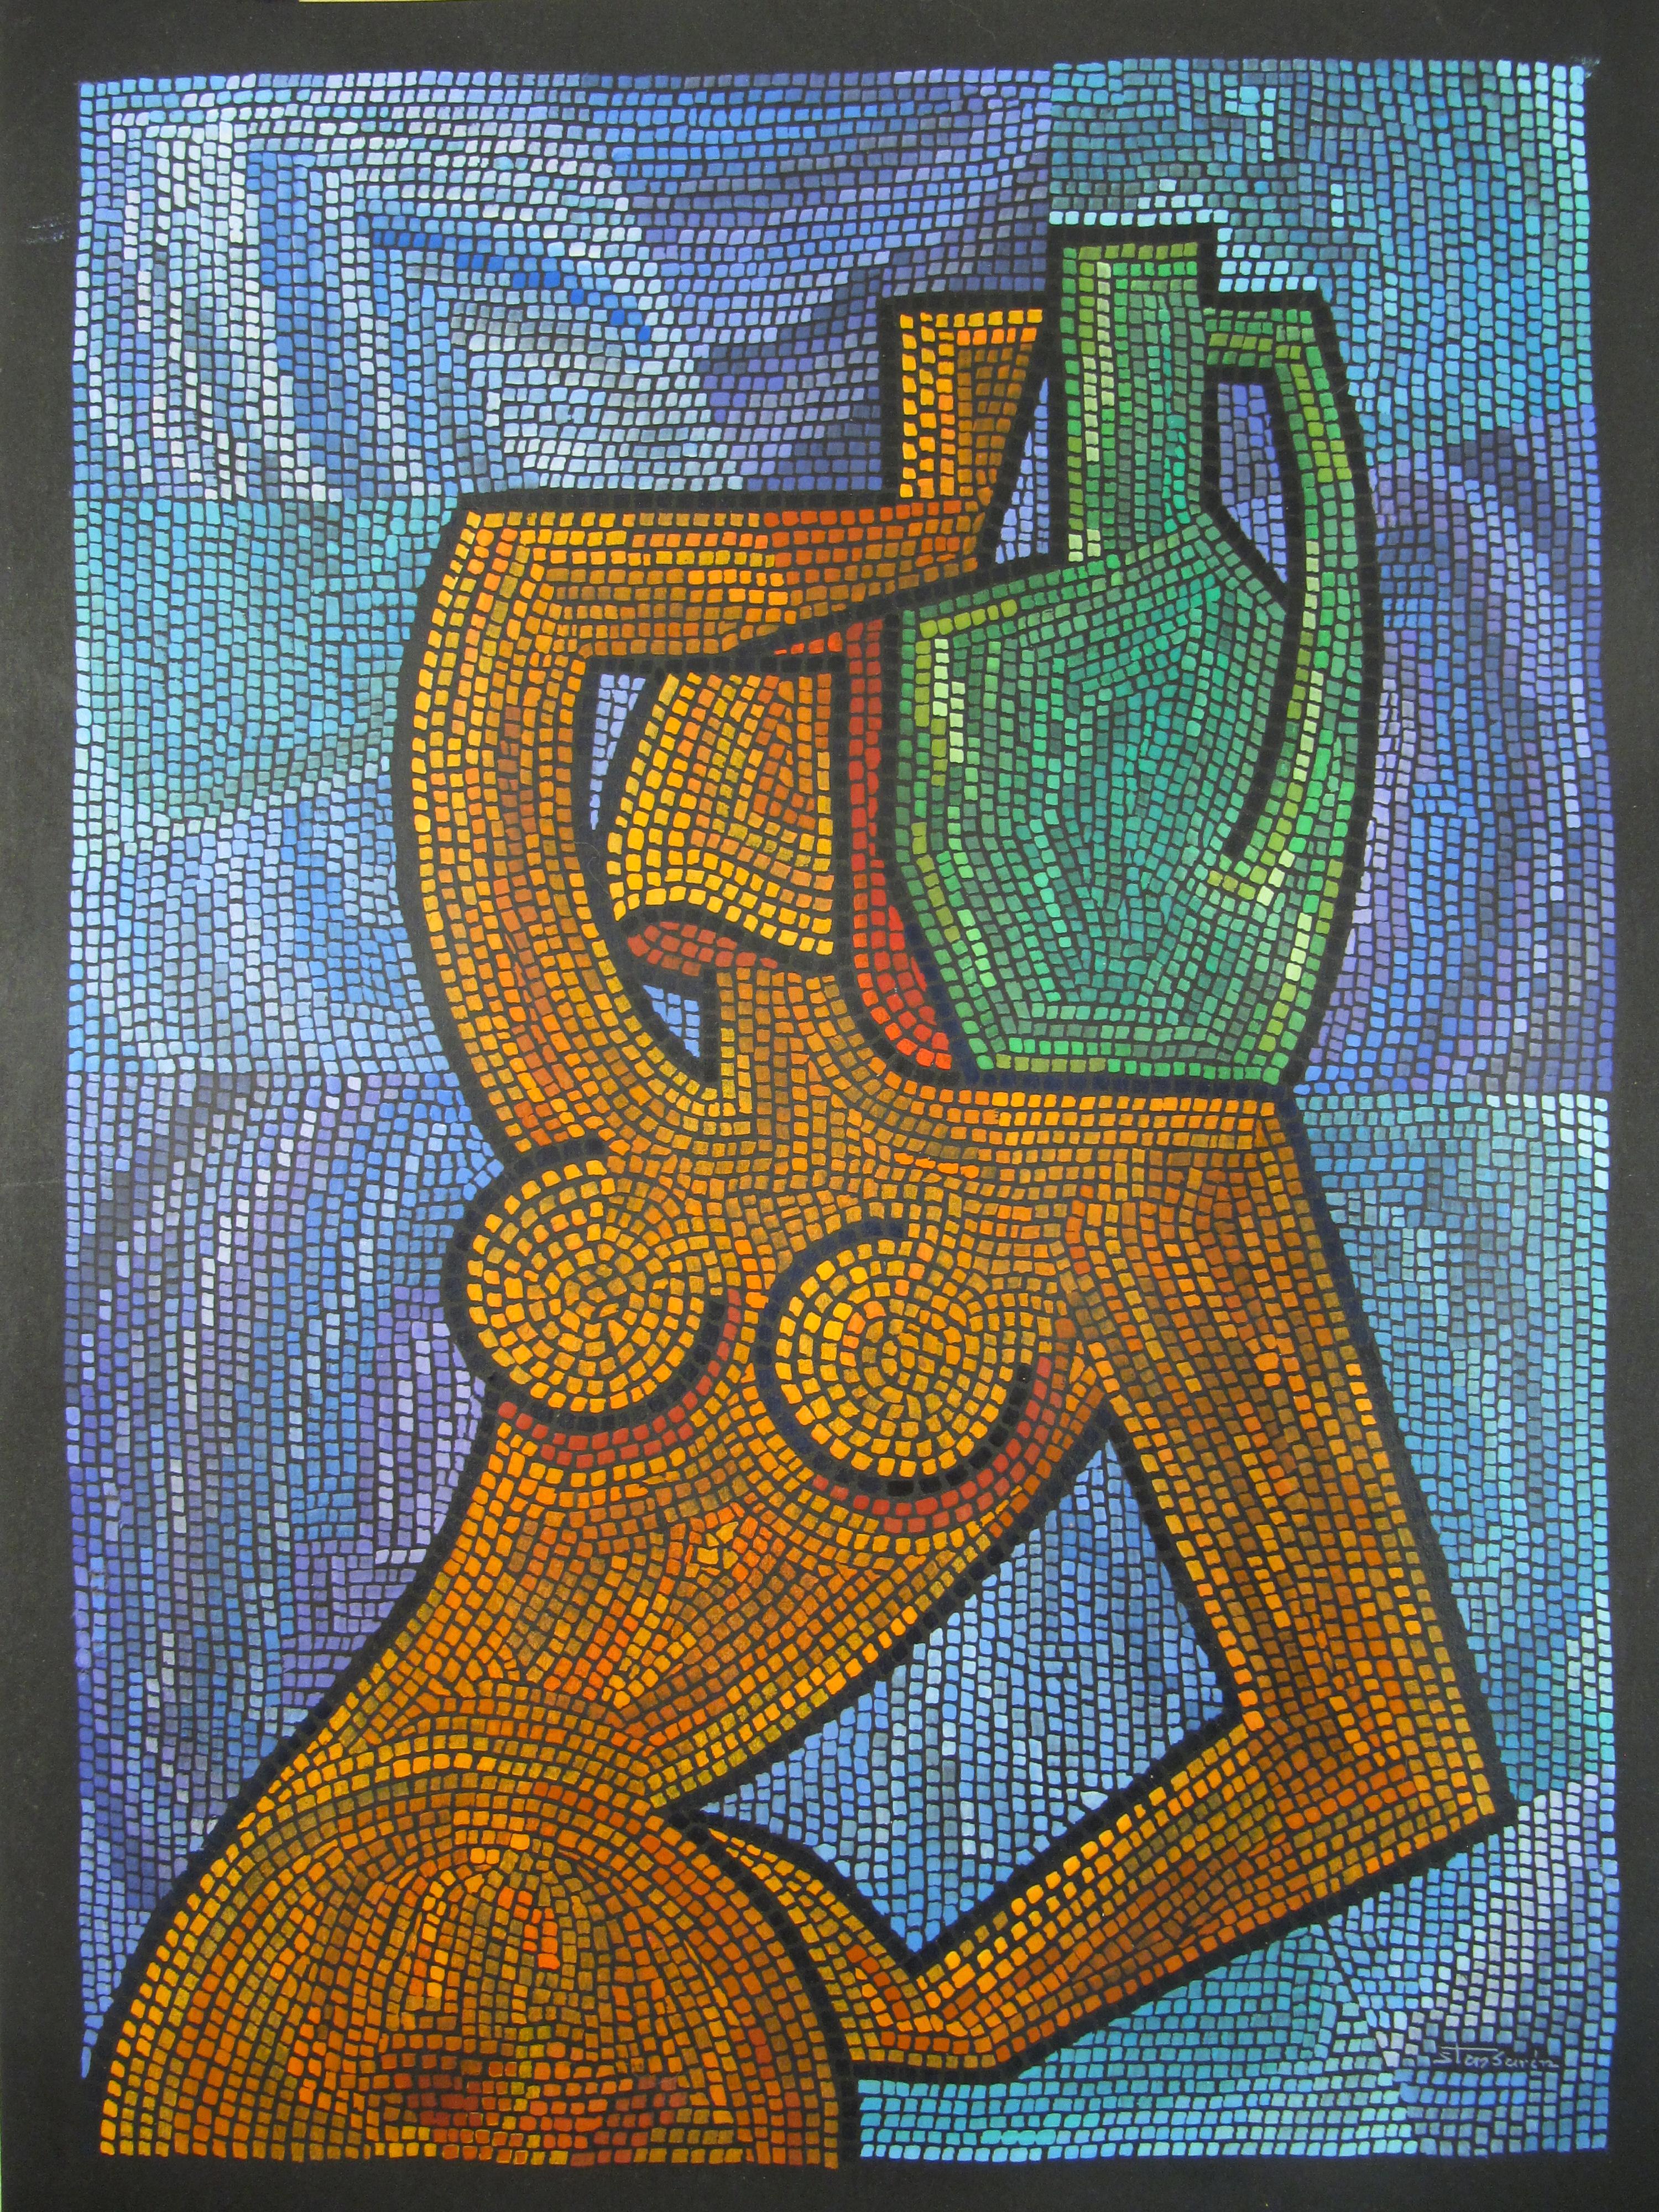 (Bo Arvid) Sten Burén
(Swedish, ∗ 12th July 1909, Södra Munkarp; † 31st January 1993, Burlöv)

Female Nude carrying an Amphora

•	Mosaic style painting in either gouache and/or oil paint on thick paper, ca. 50 x 35 cm
•	Image size ca. 43 x 31